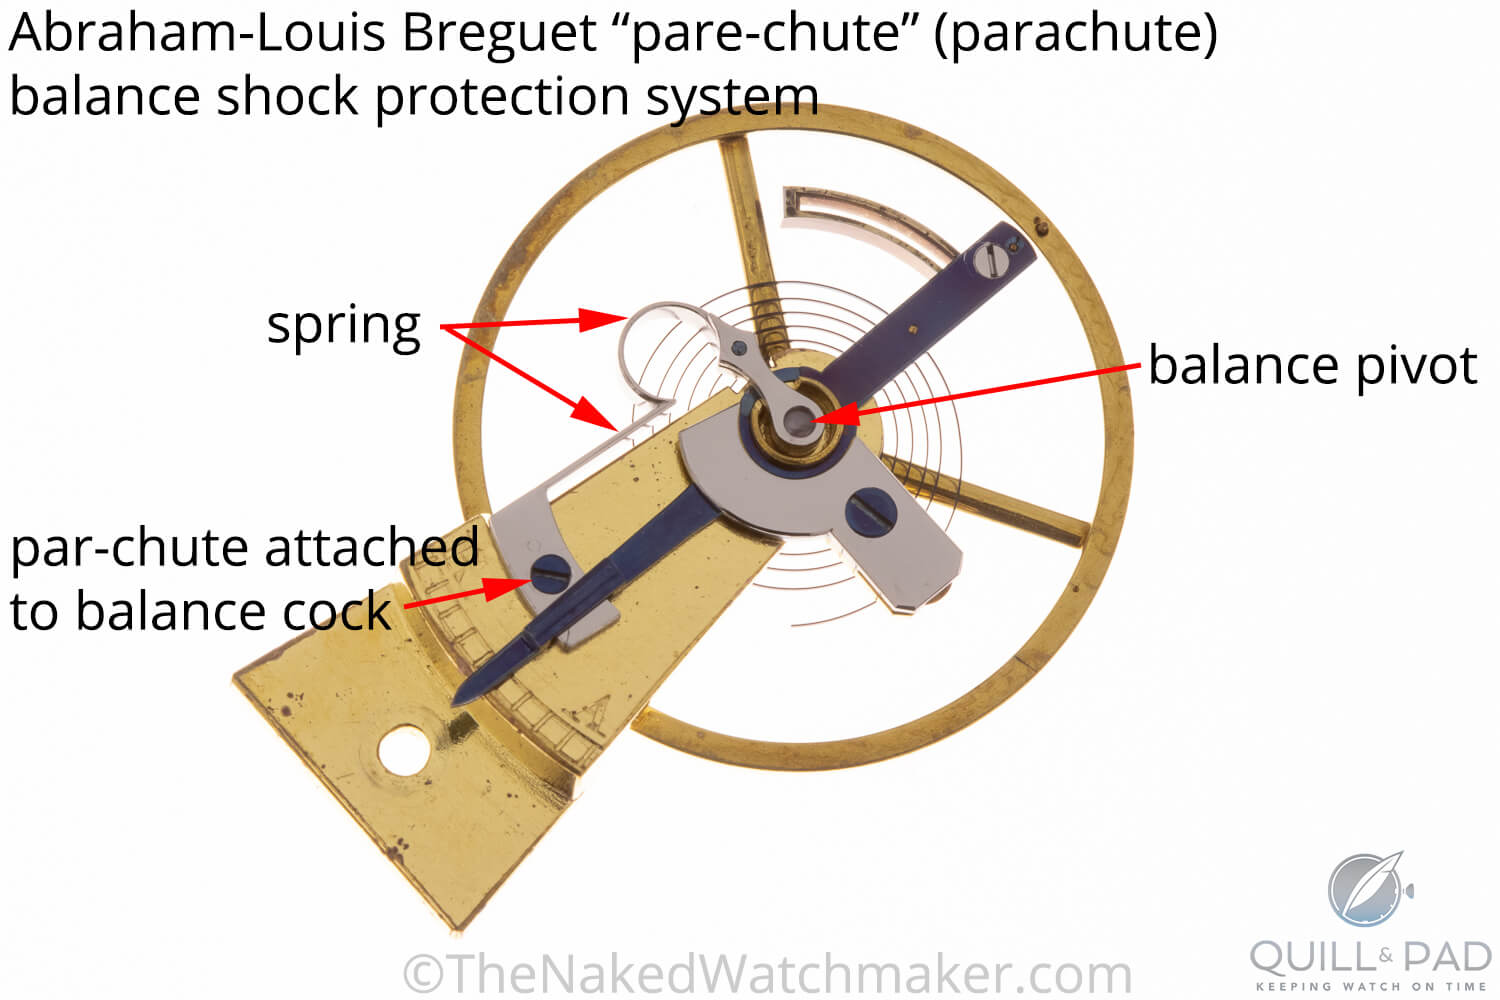 Pare-chute balance shock protection system invented by Abraham-Louis Breguet